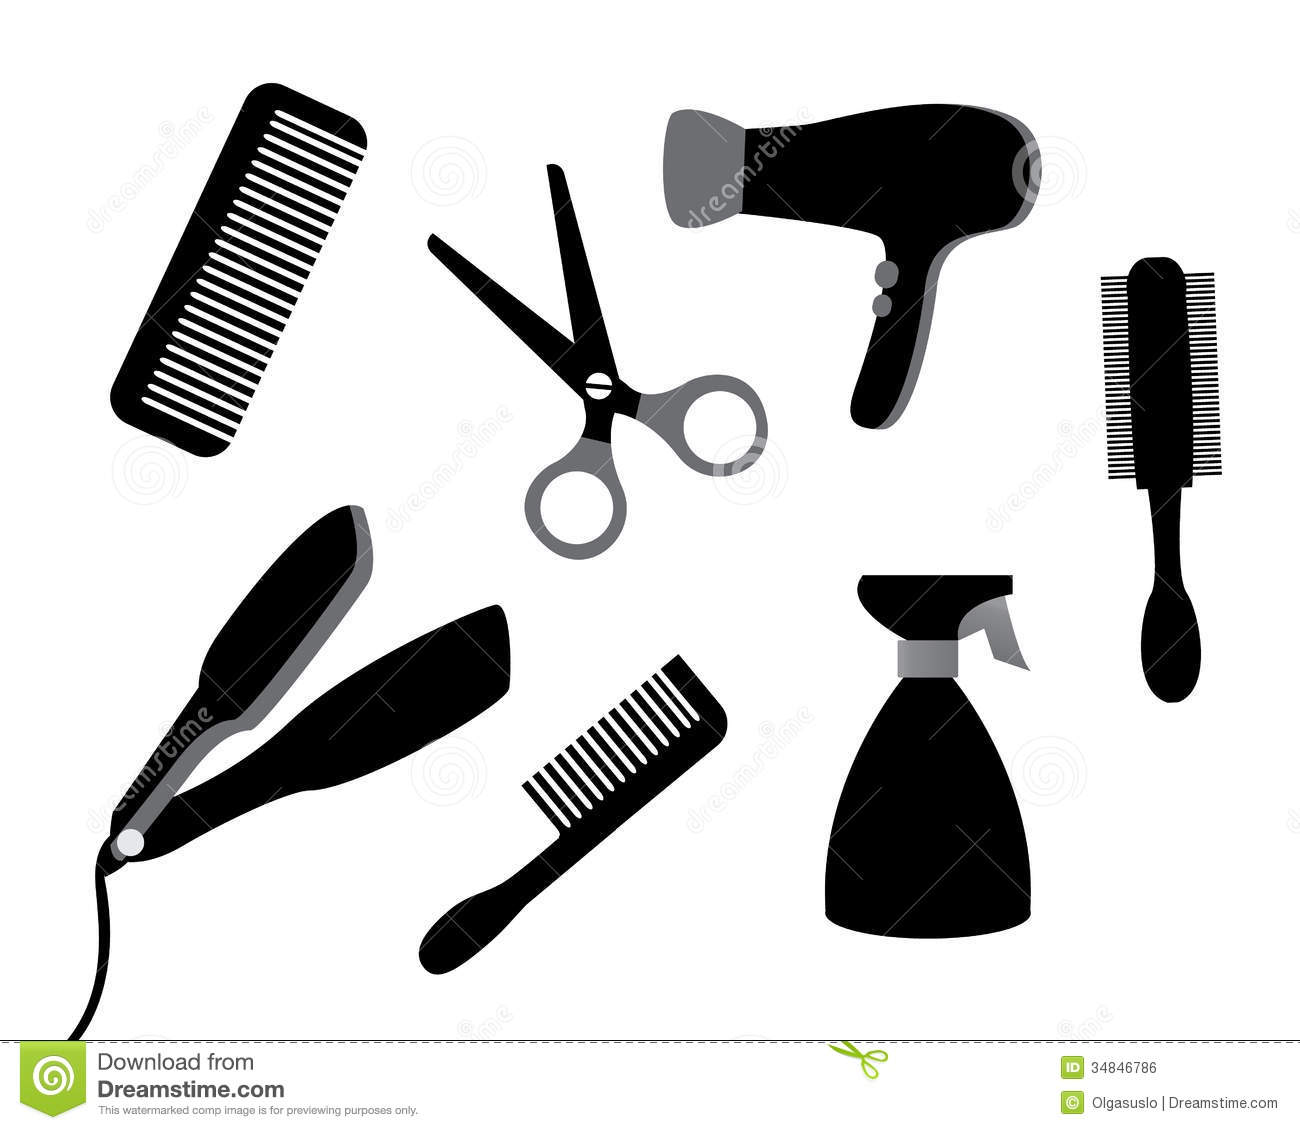 Devices For Hair Care Royalty Free Stock Image   Image  34846786